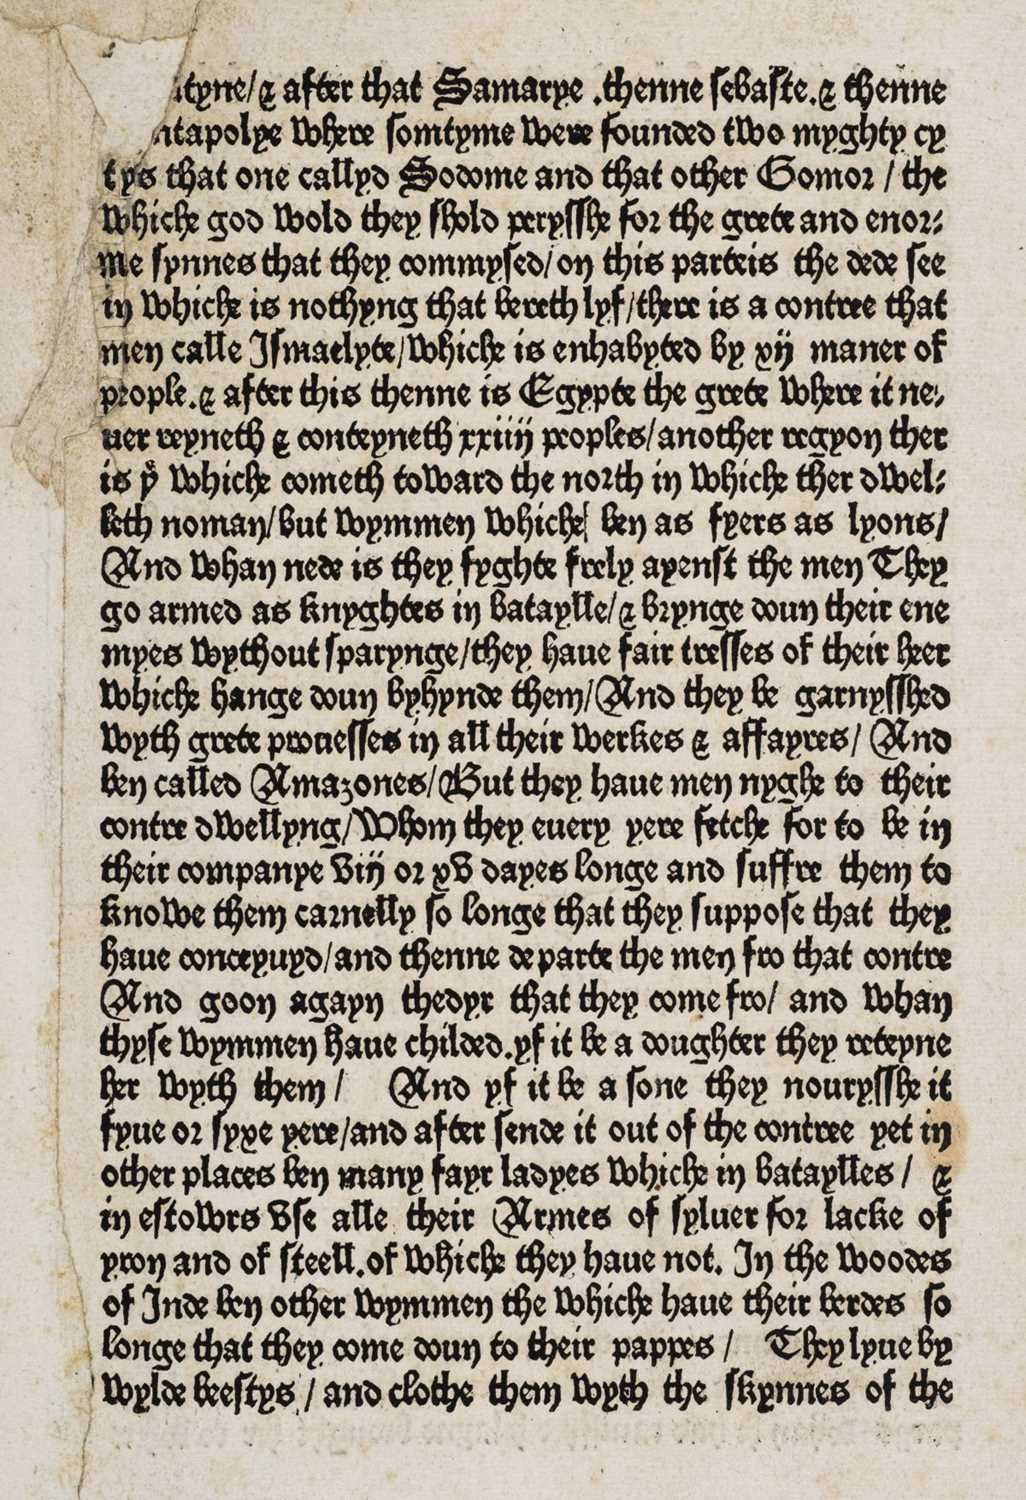 Lot 503 - Caxton (William). Single printed leaf from The Mirrour of the World, 2nd edition, 1490